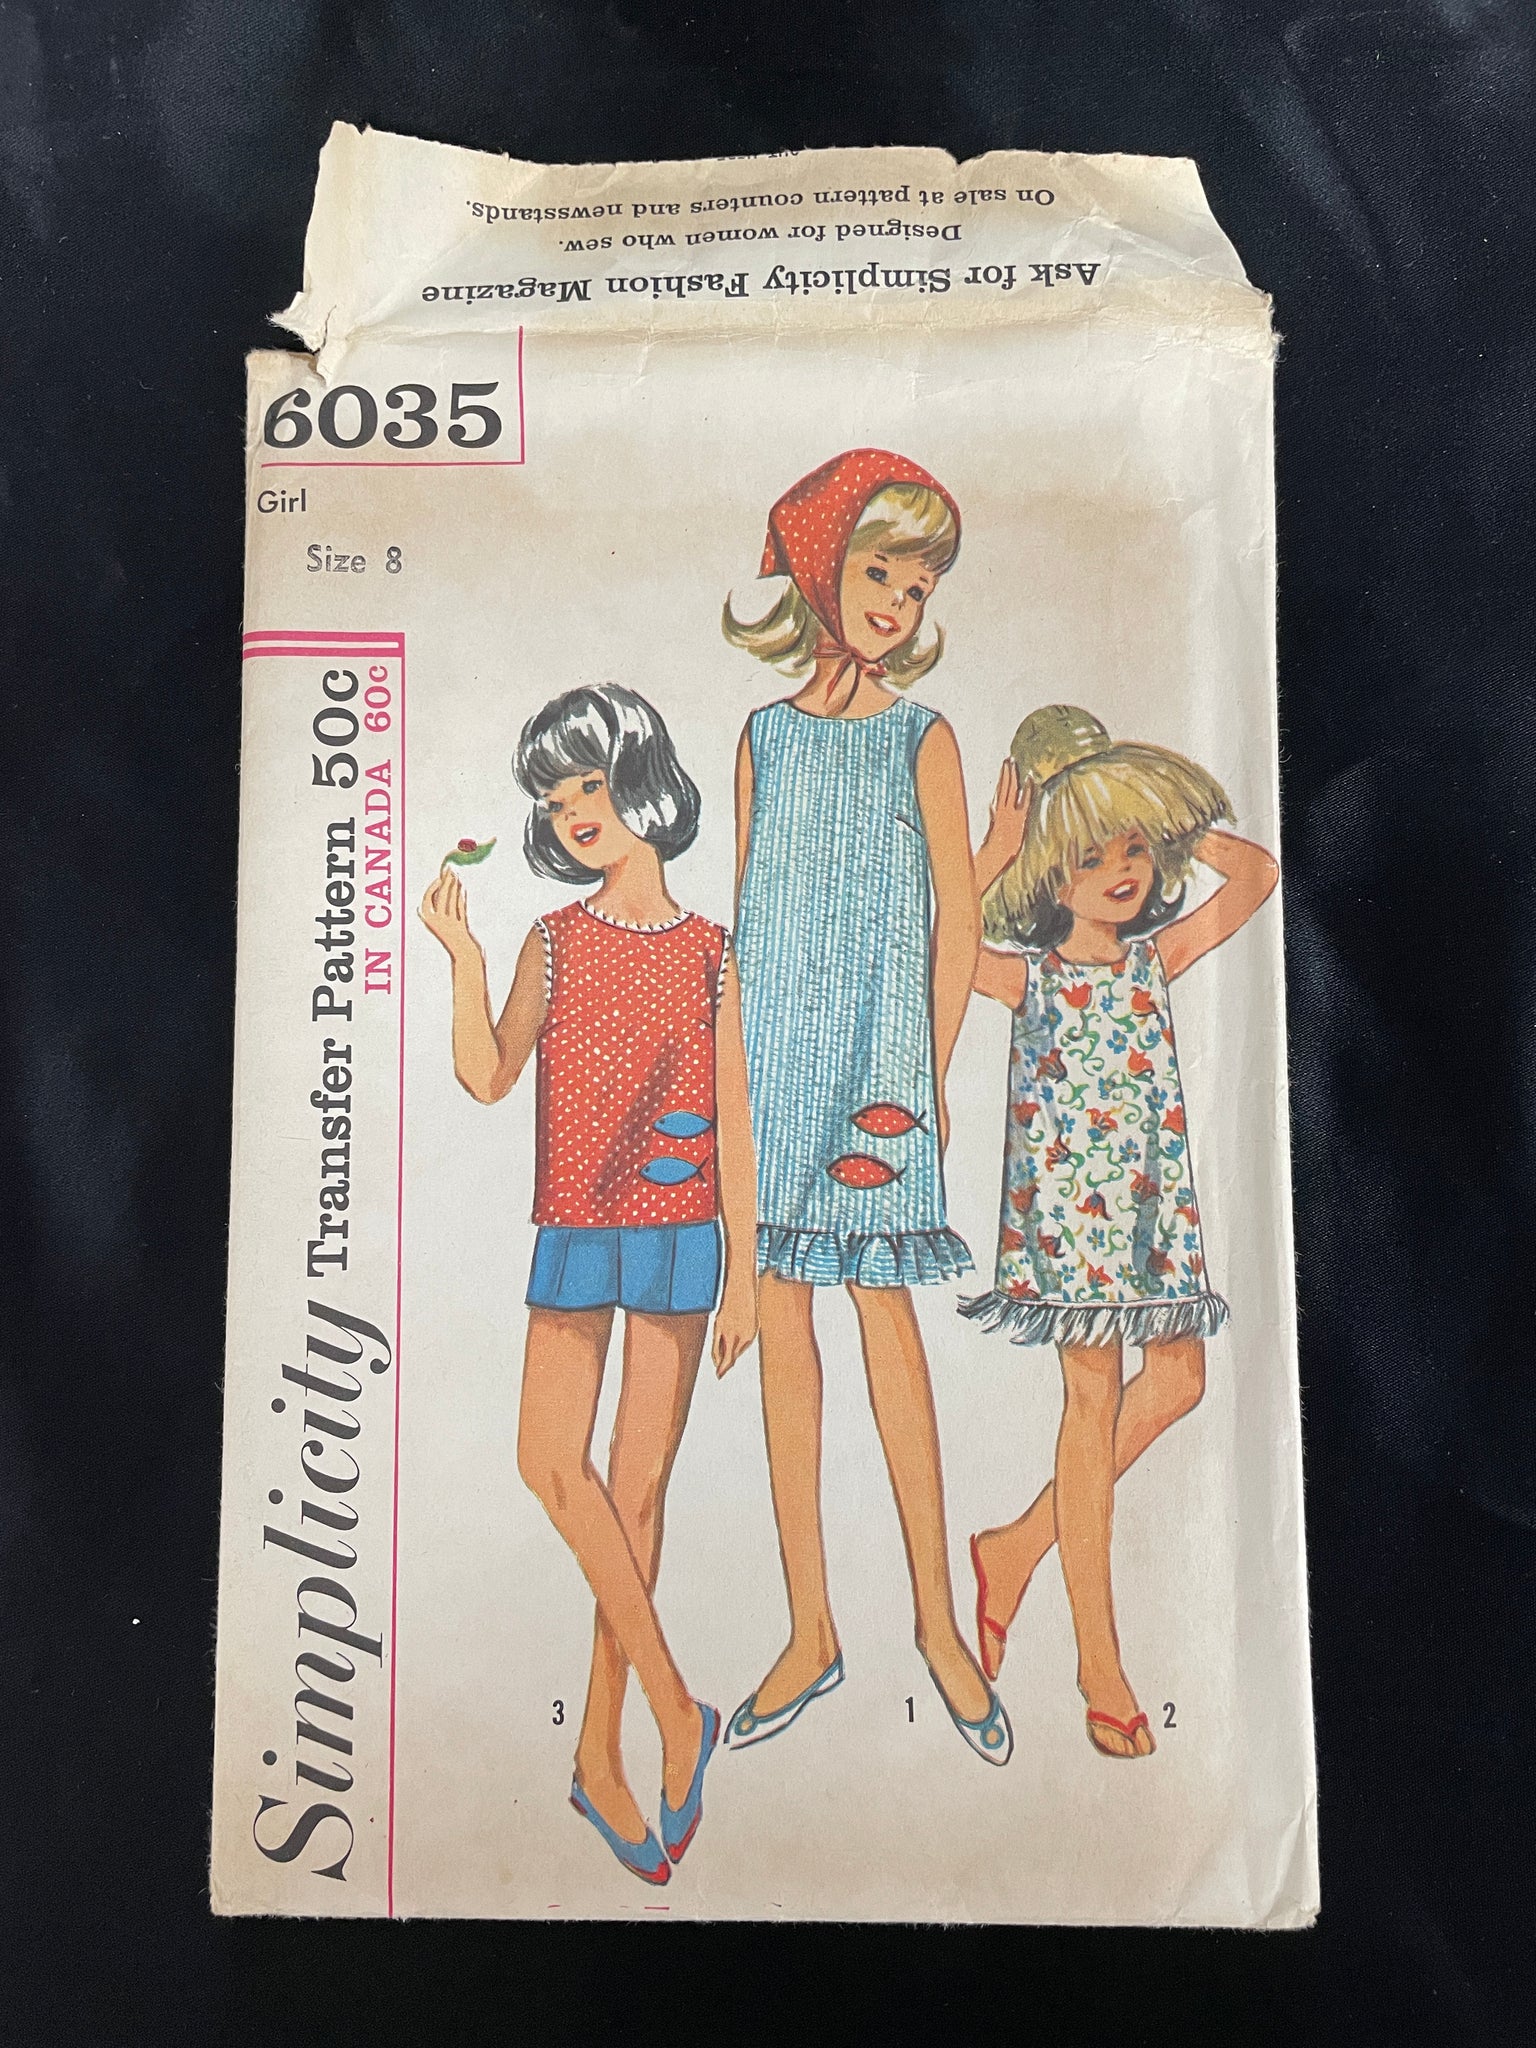 1965 Simplicity 6035 Pattern - Child's Dress, Top, Shorts and Scarf